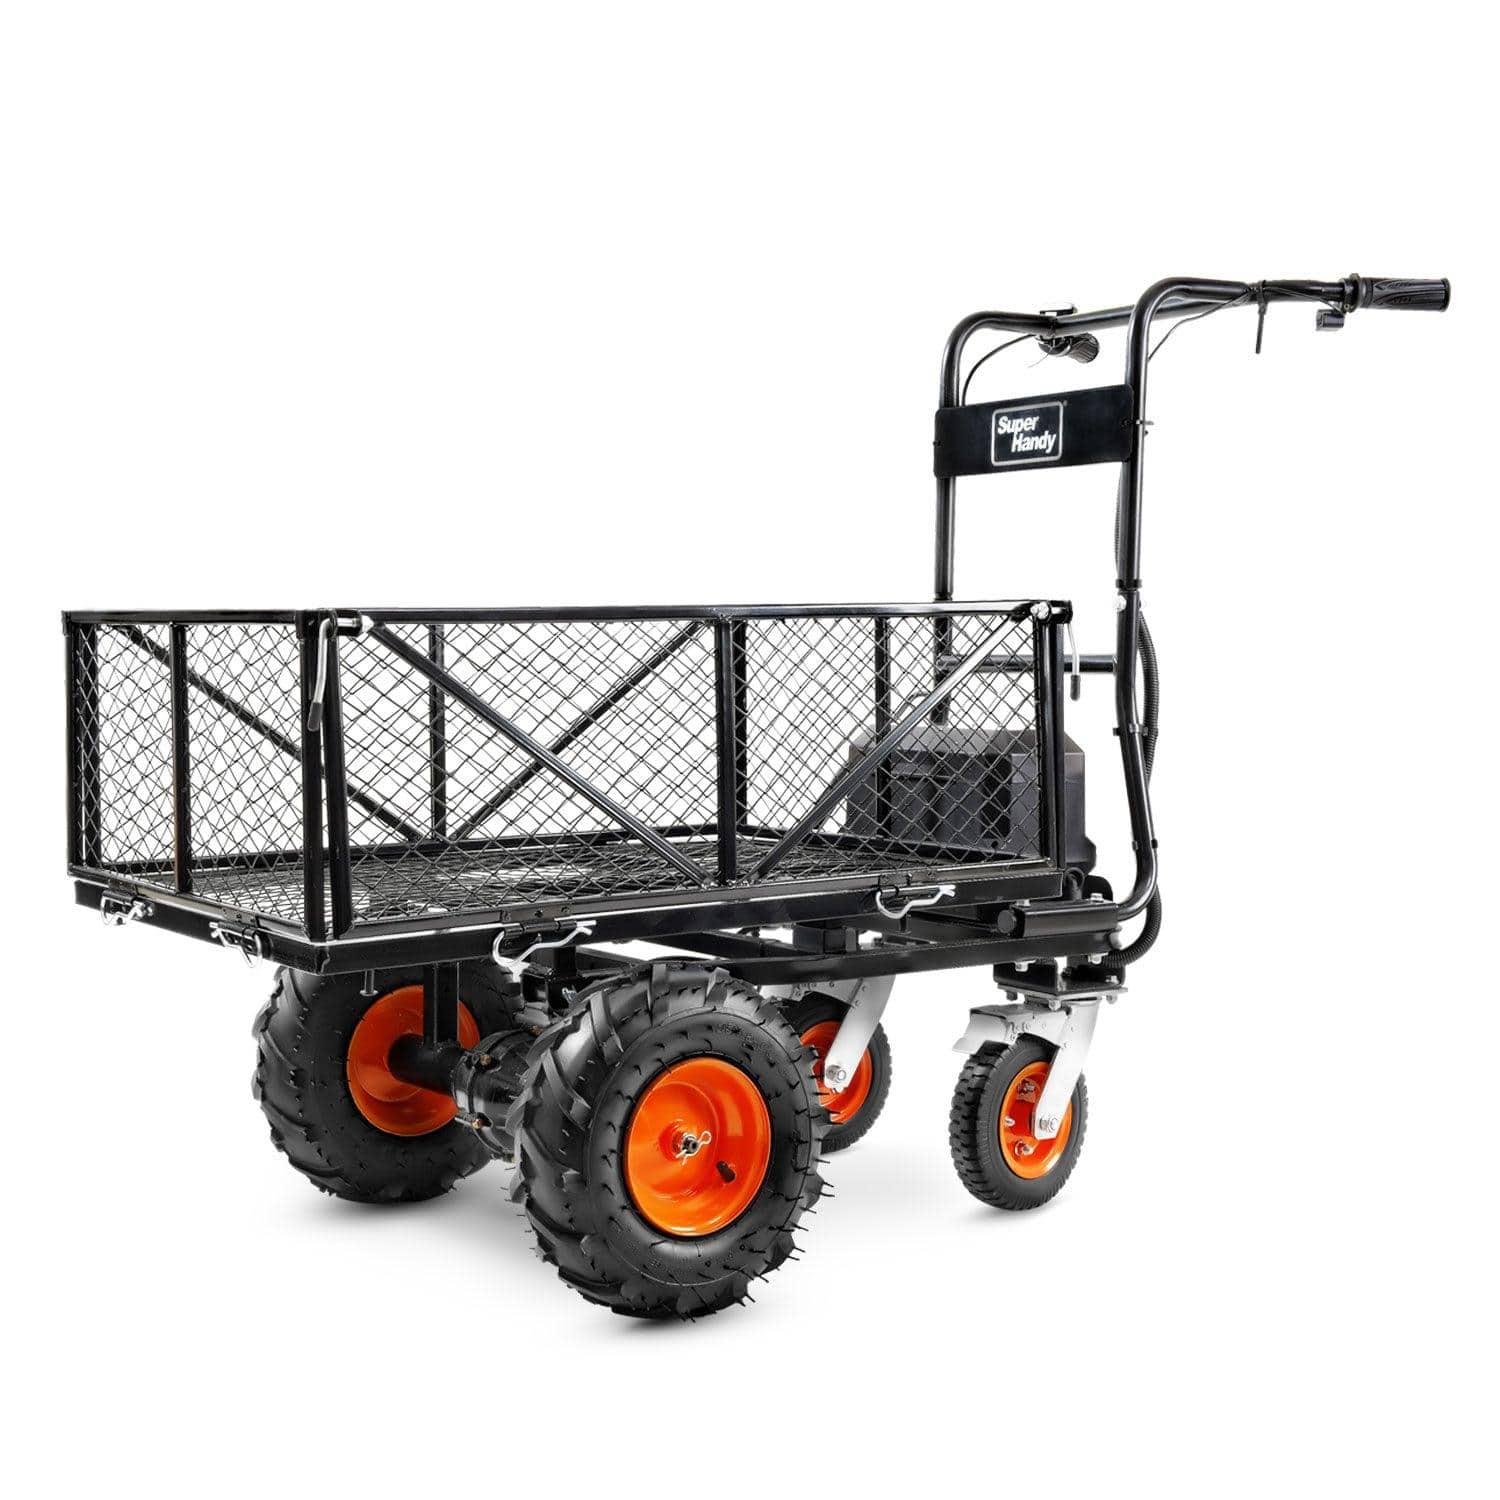 SuperHandy Self-Propelled Electric Utility Wagon - 48V 2Ah Battery System, 660LB Hauling Capacity (Upgraded Design) SKU: GUO095 - Prime Yard Tools